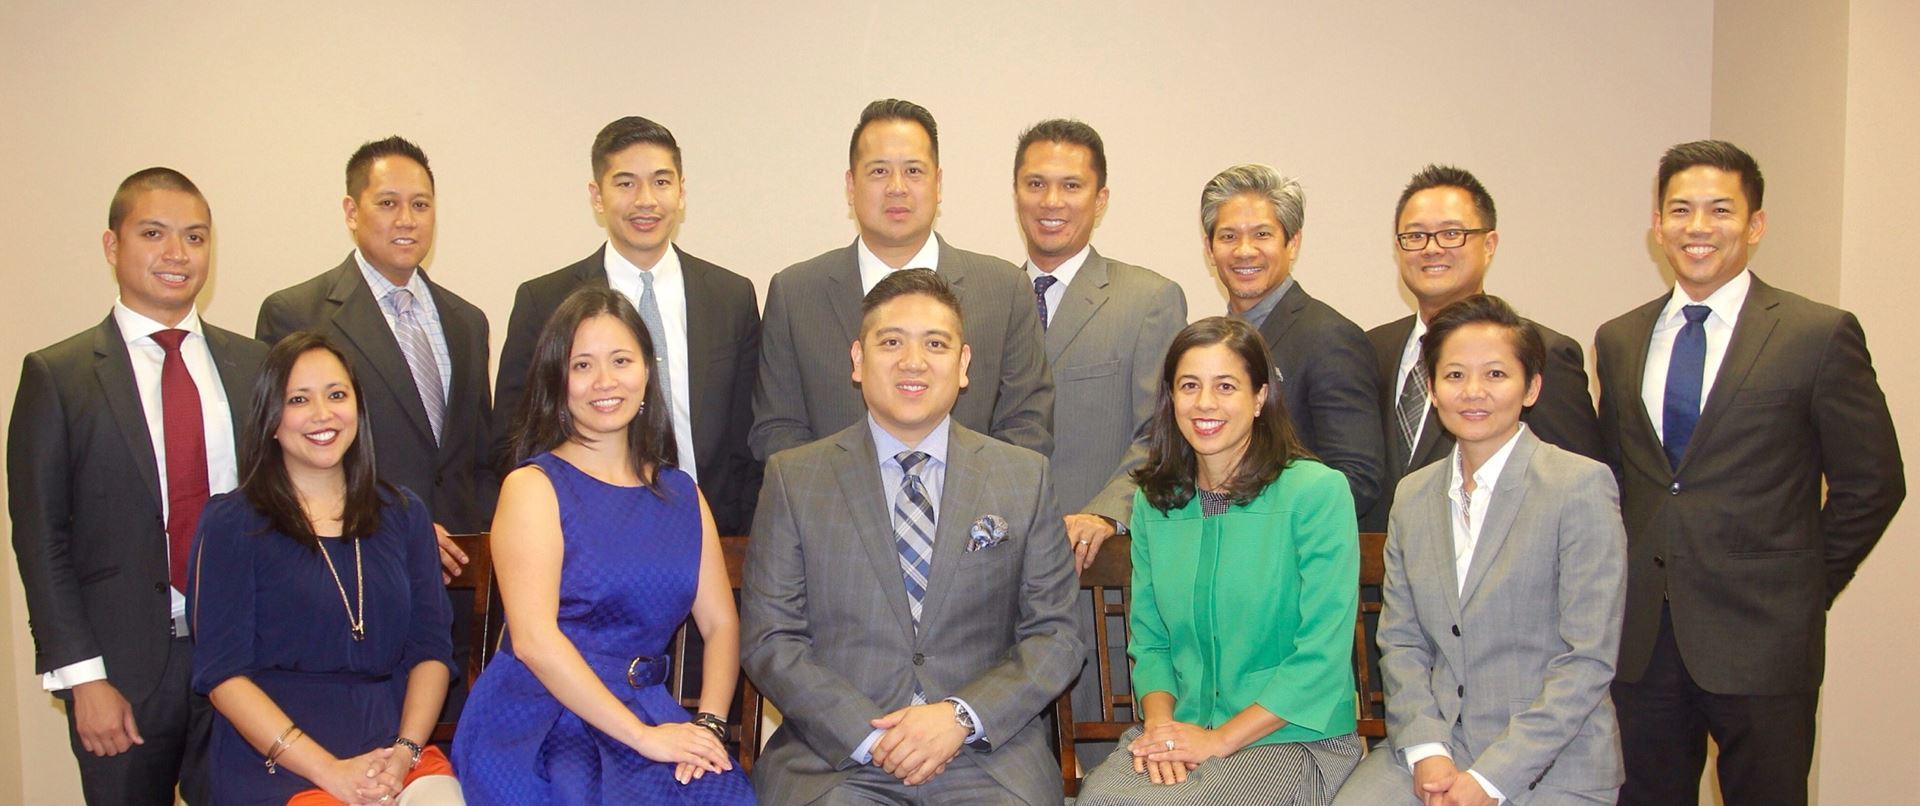 2015-16 NFALA Board of Governors